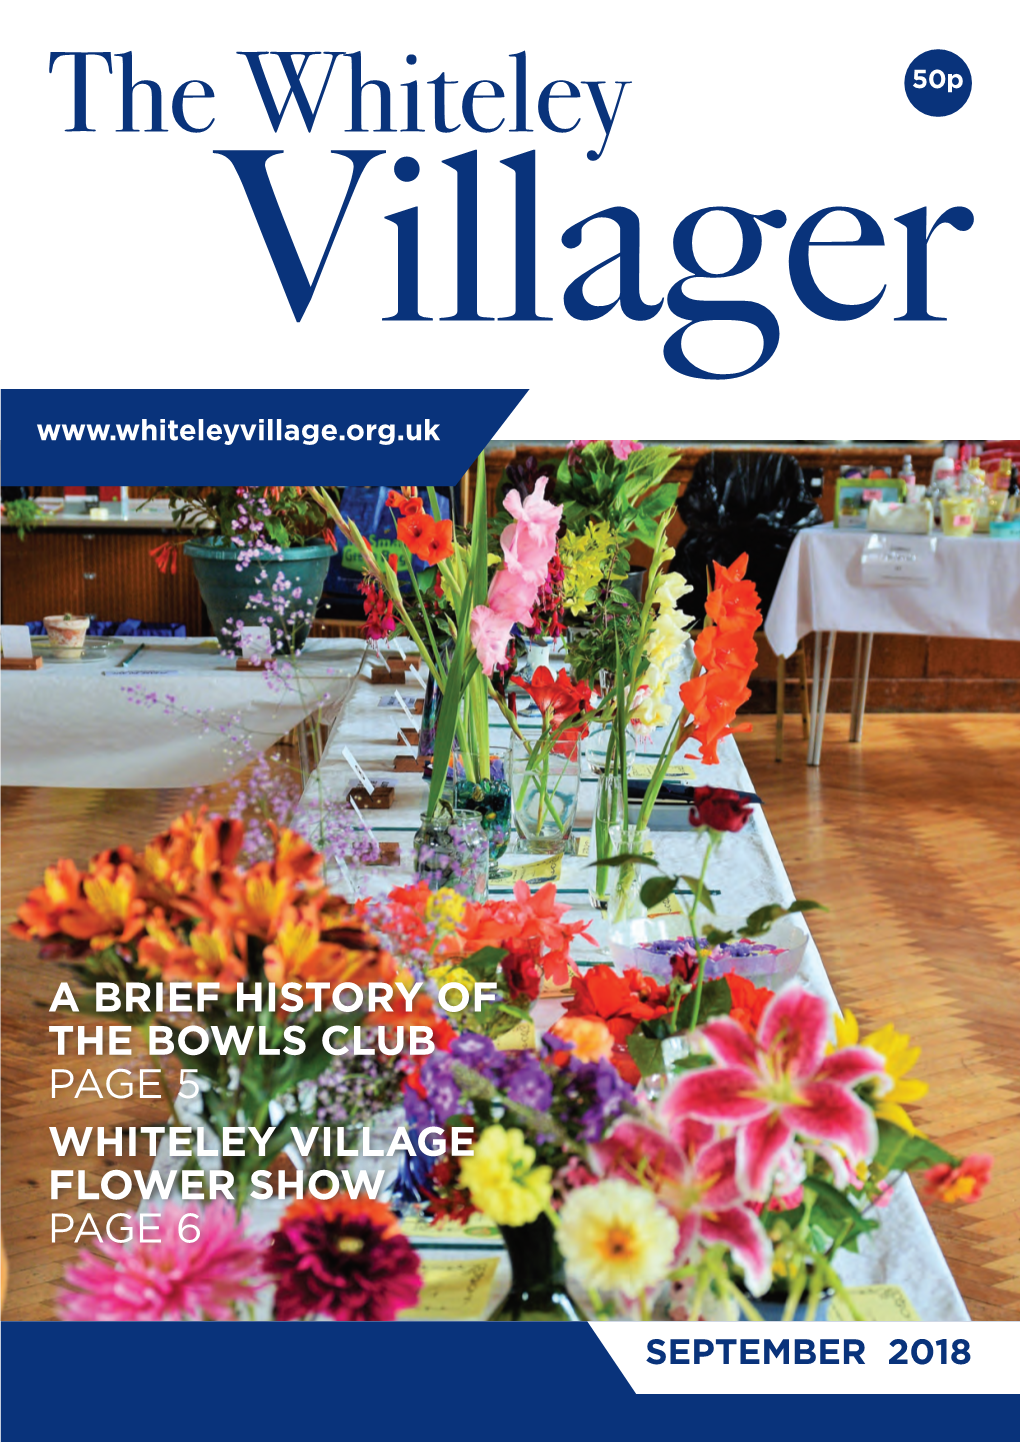 A Brief History of the Bowls Club Page 5 Whiteley Village Flower Show Page 6